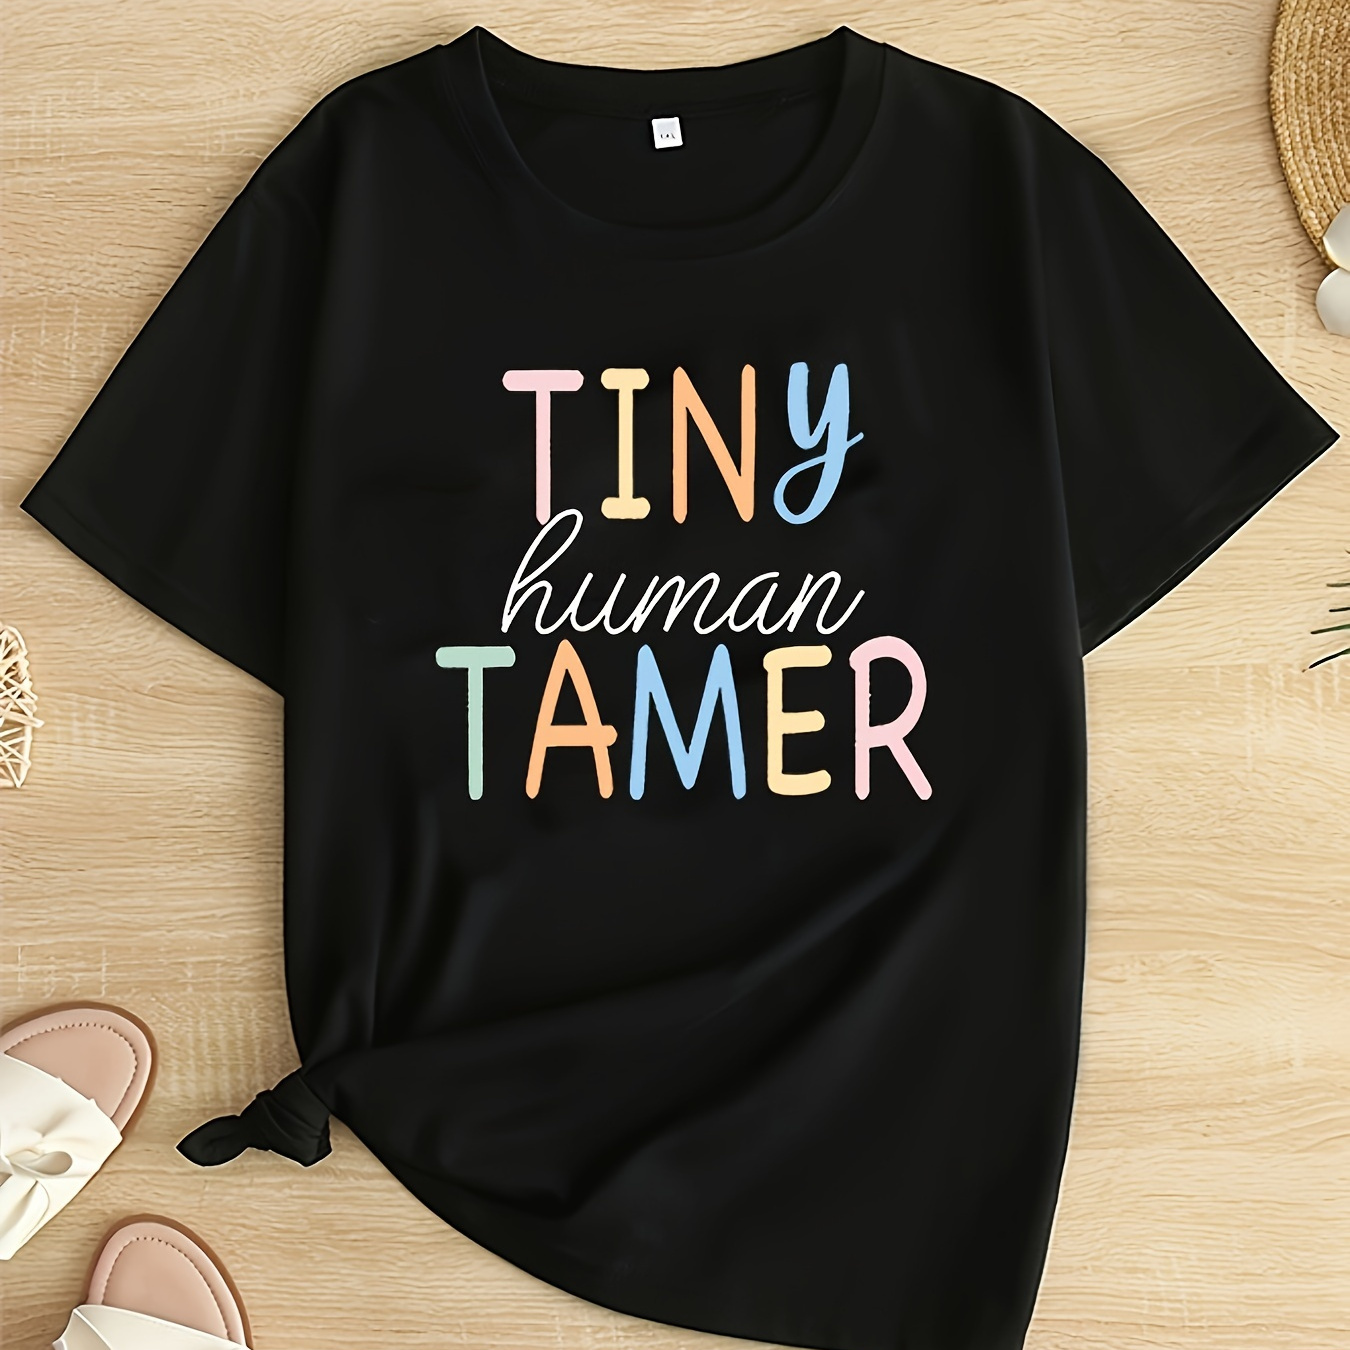 

Plus Size Tiny Tamer Print T-shirt, Casual Short Sleeve Top For Spring & Summer, Women's Plus Size Clothing